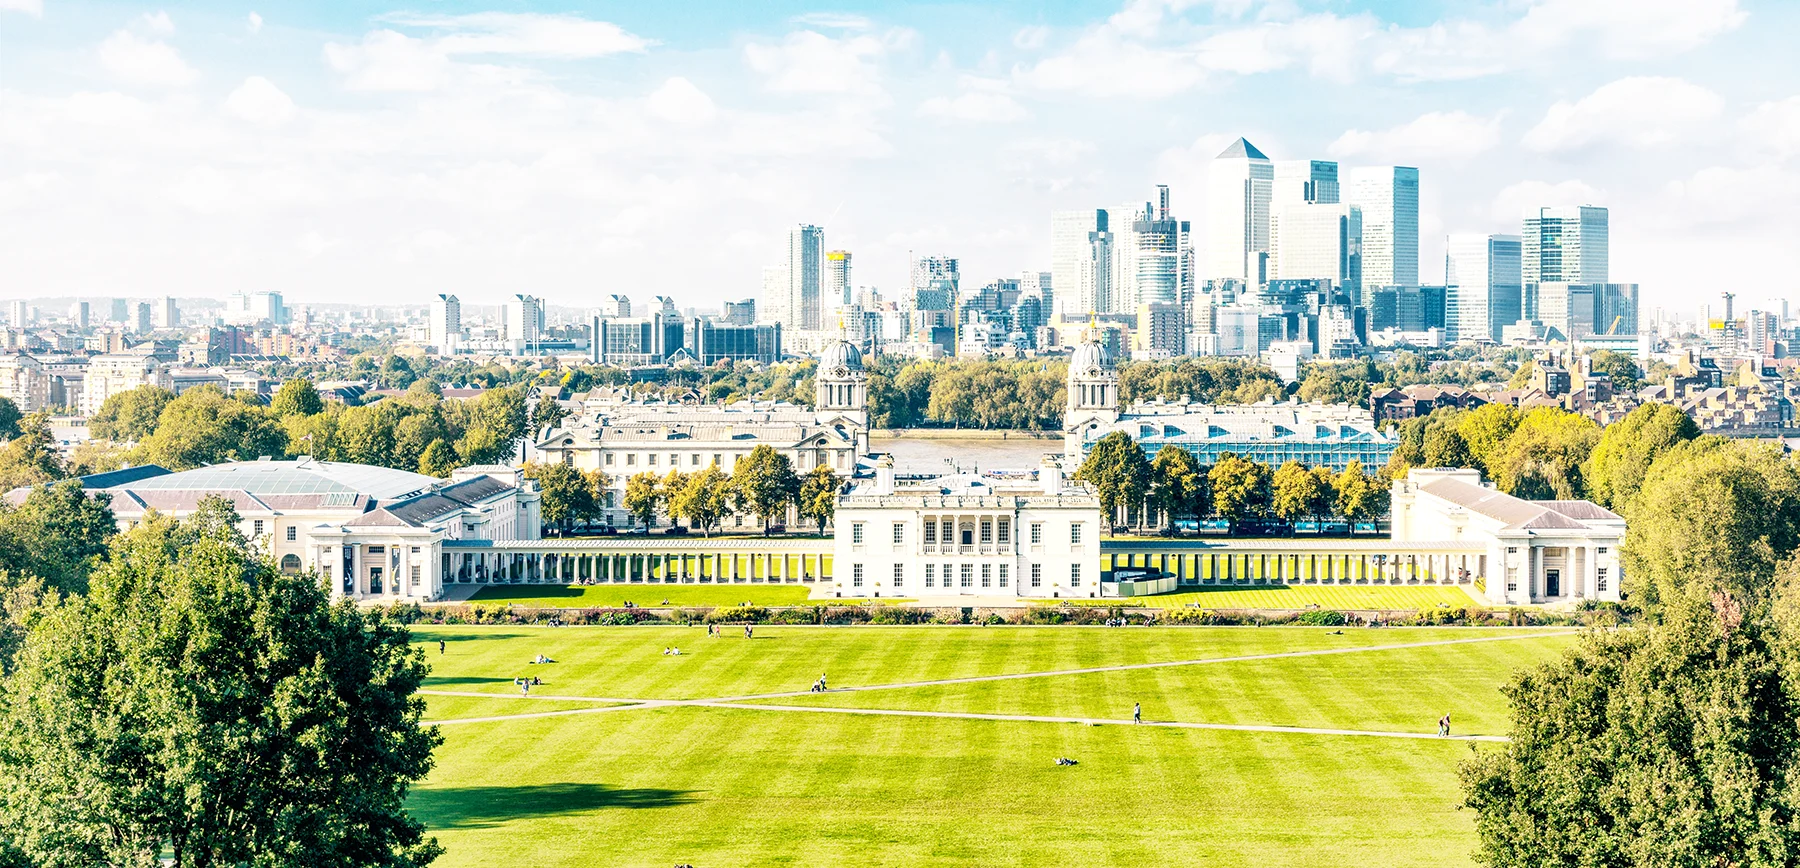 A green park with historic buildings in Greenwich, and the London skyline with several large skyscrapers in Canary Wharf in the background.